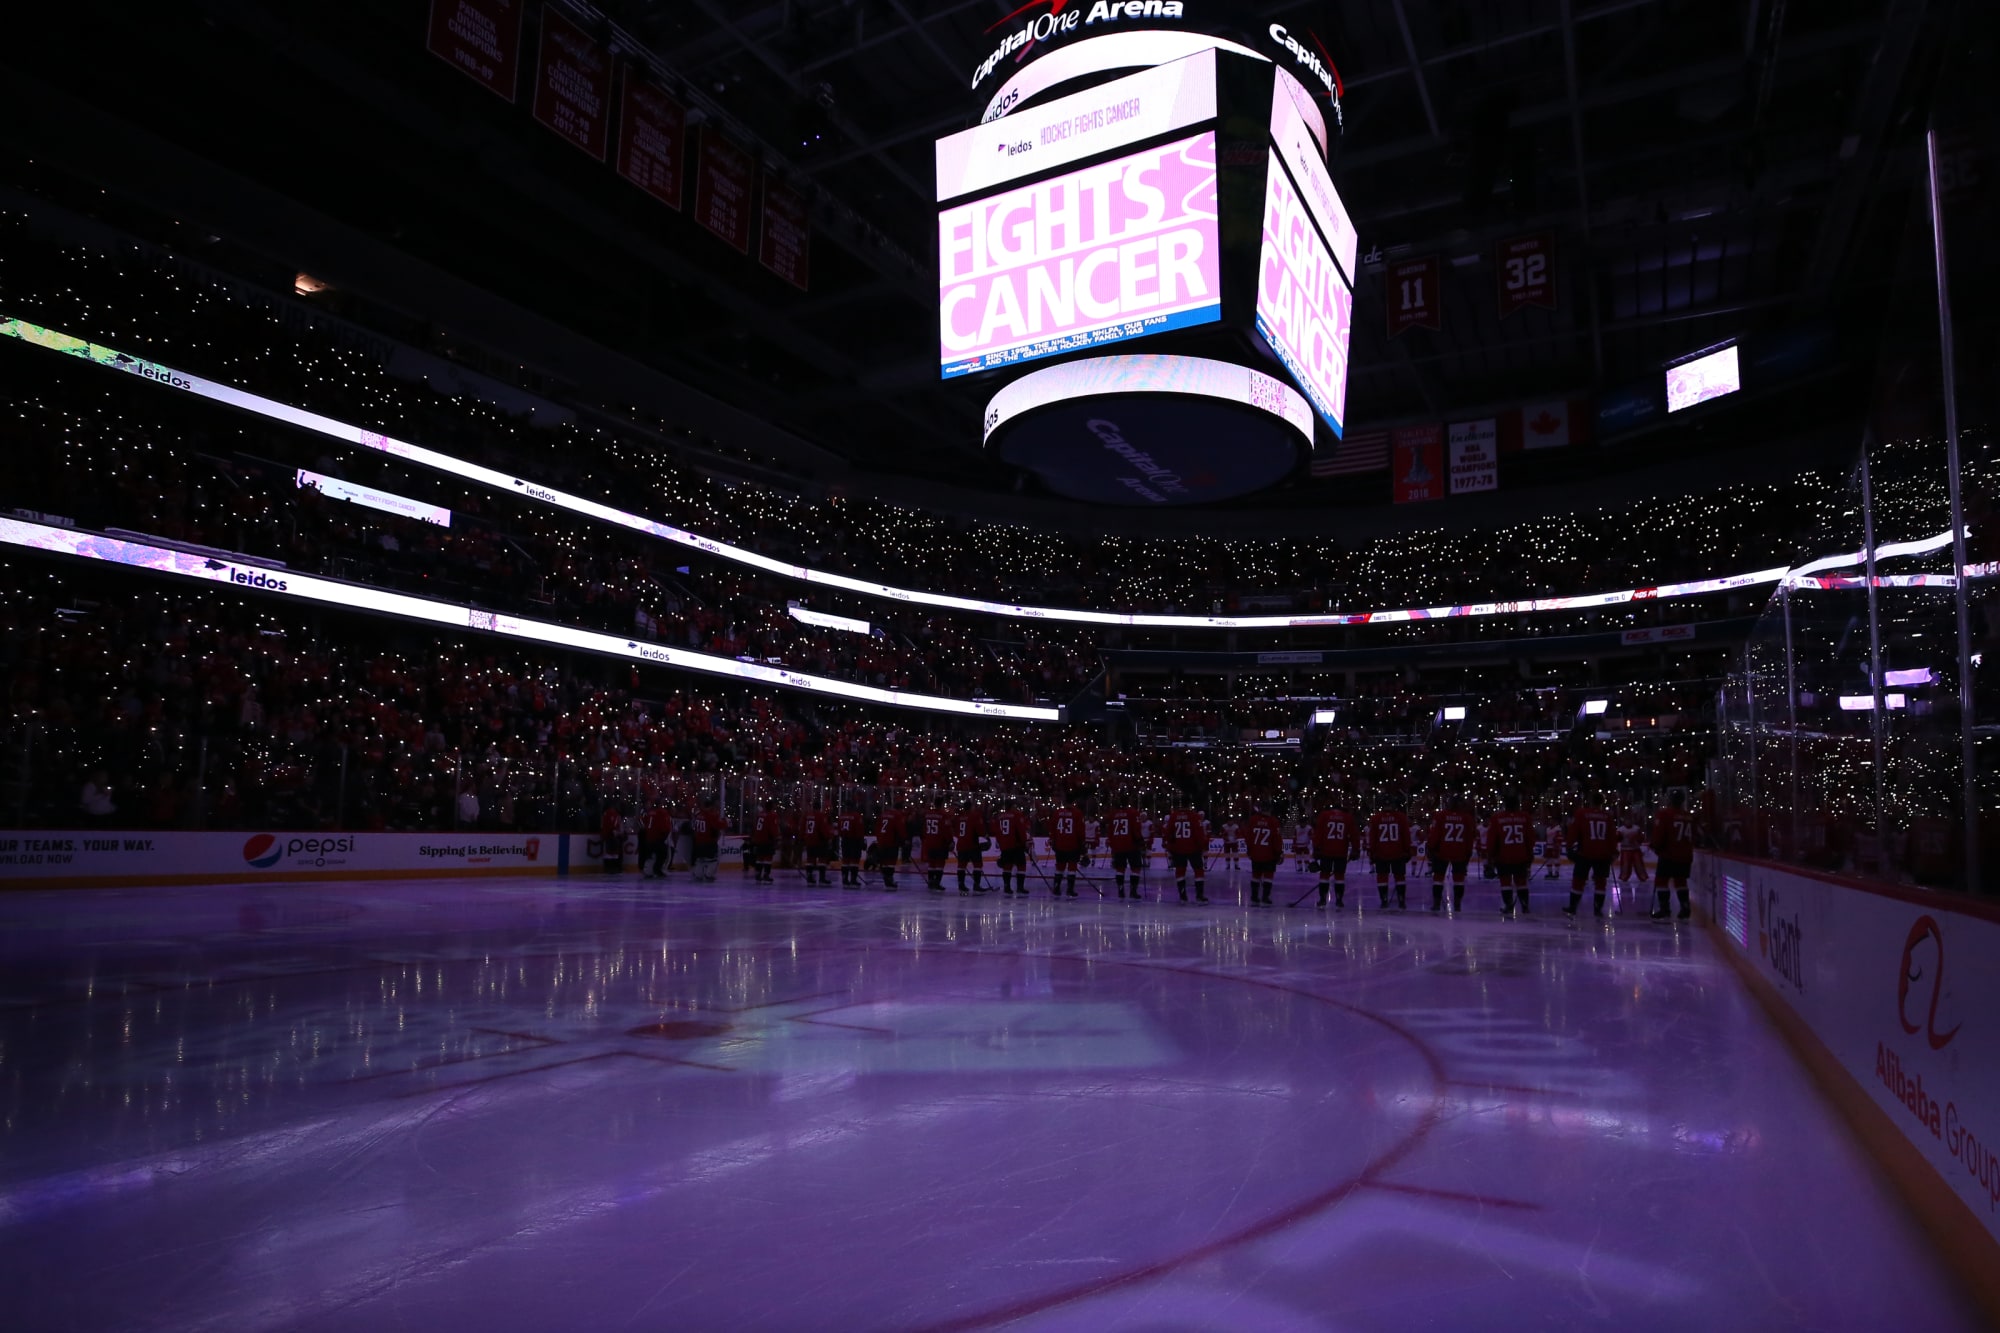 NJ Devils joined fight against cancer